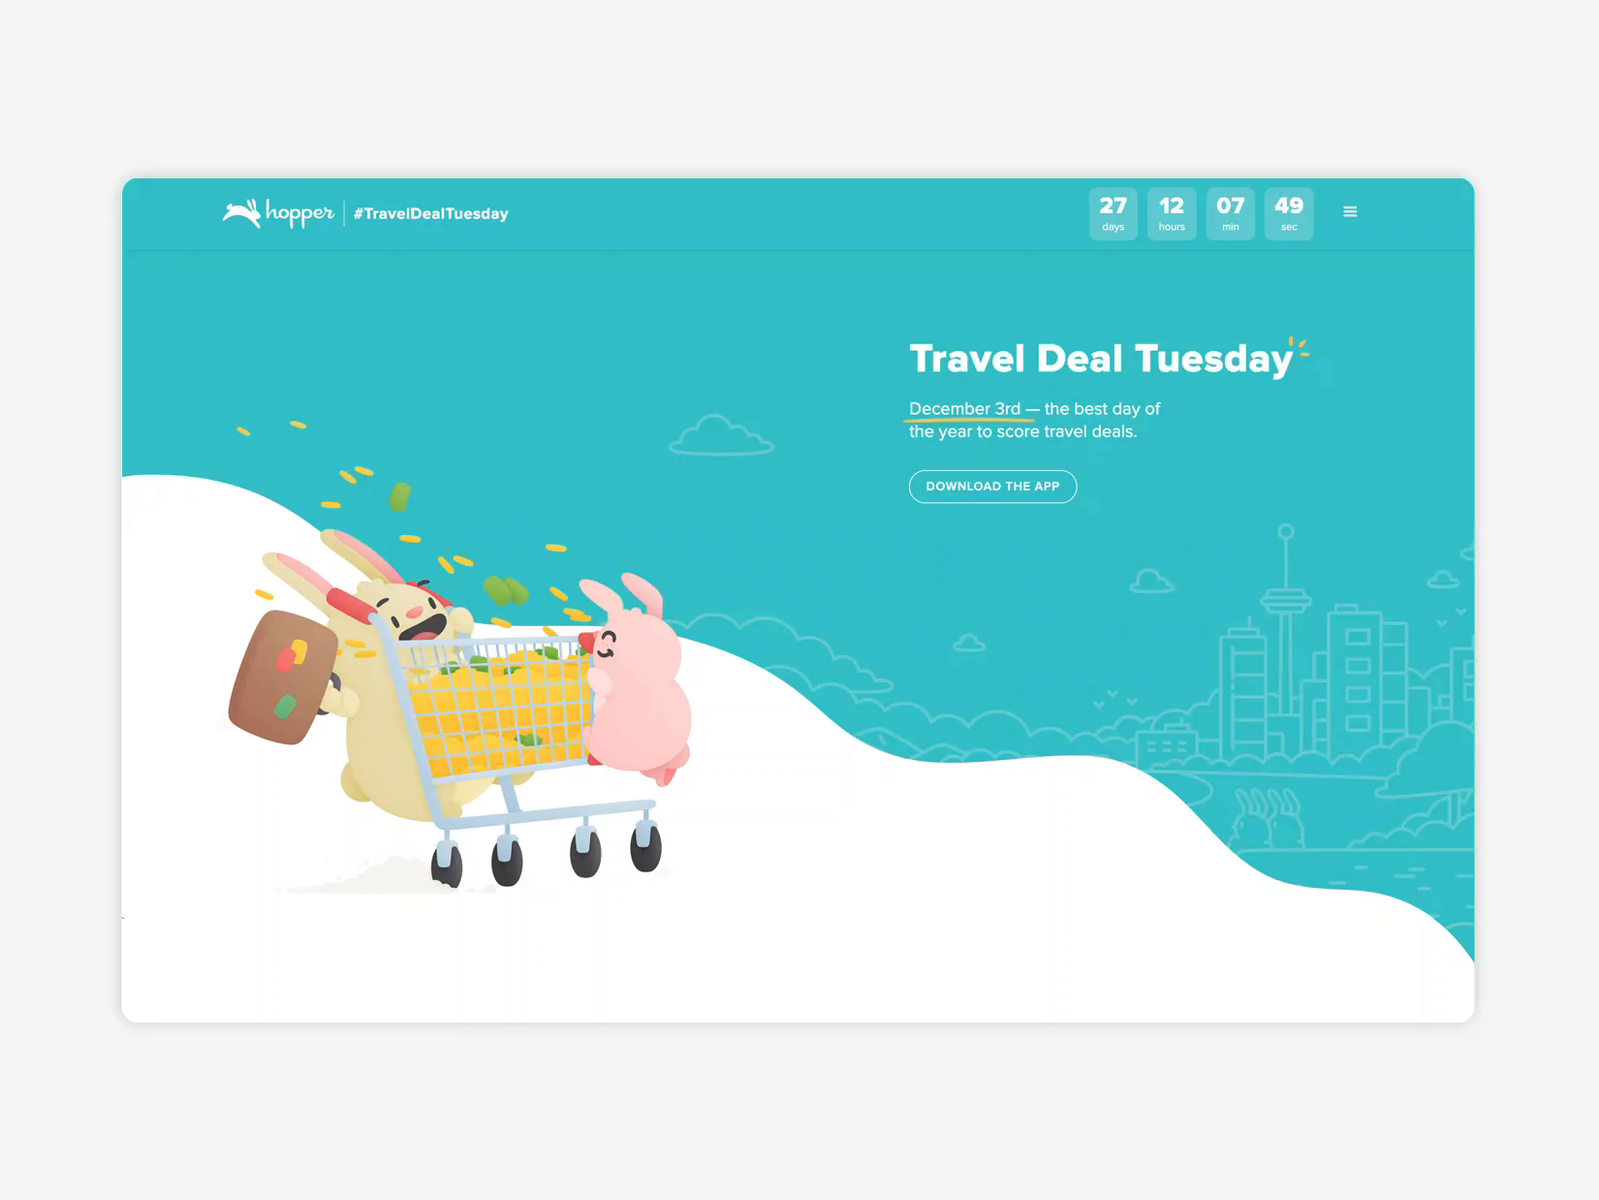 Travel Deal Tuesday 2019 Microsite by Erica Gregor for Hopper on